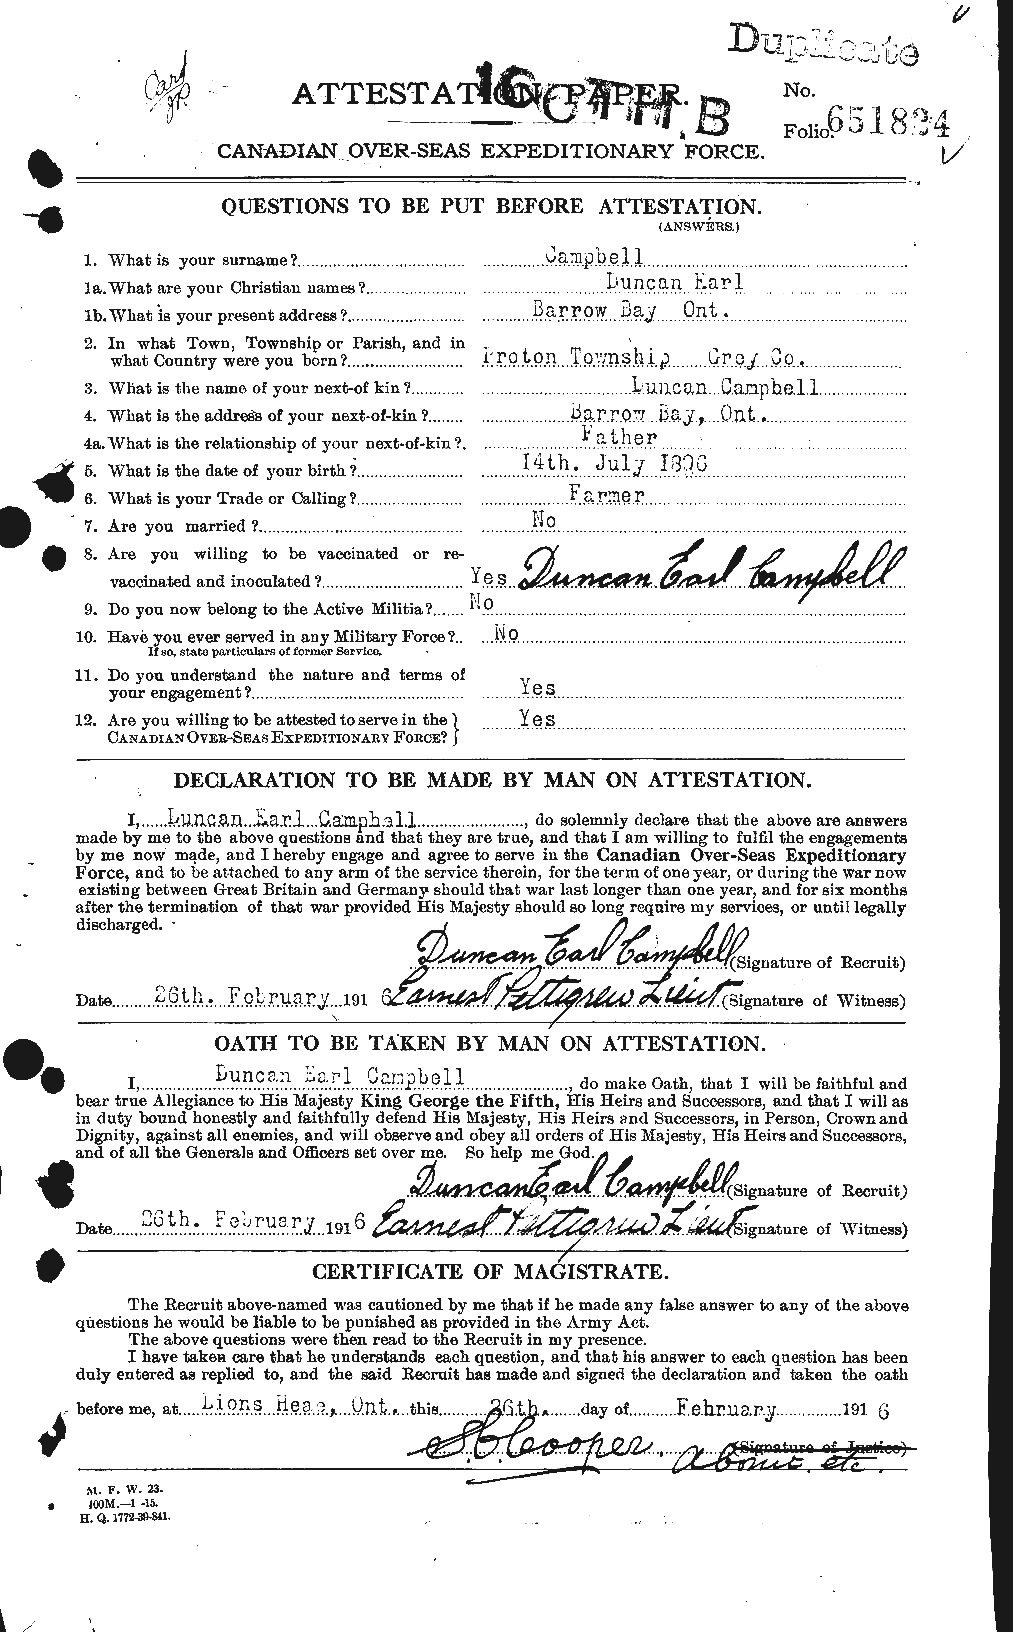 Personnel Records of the First World War - CEF 008219a